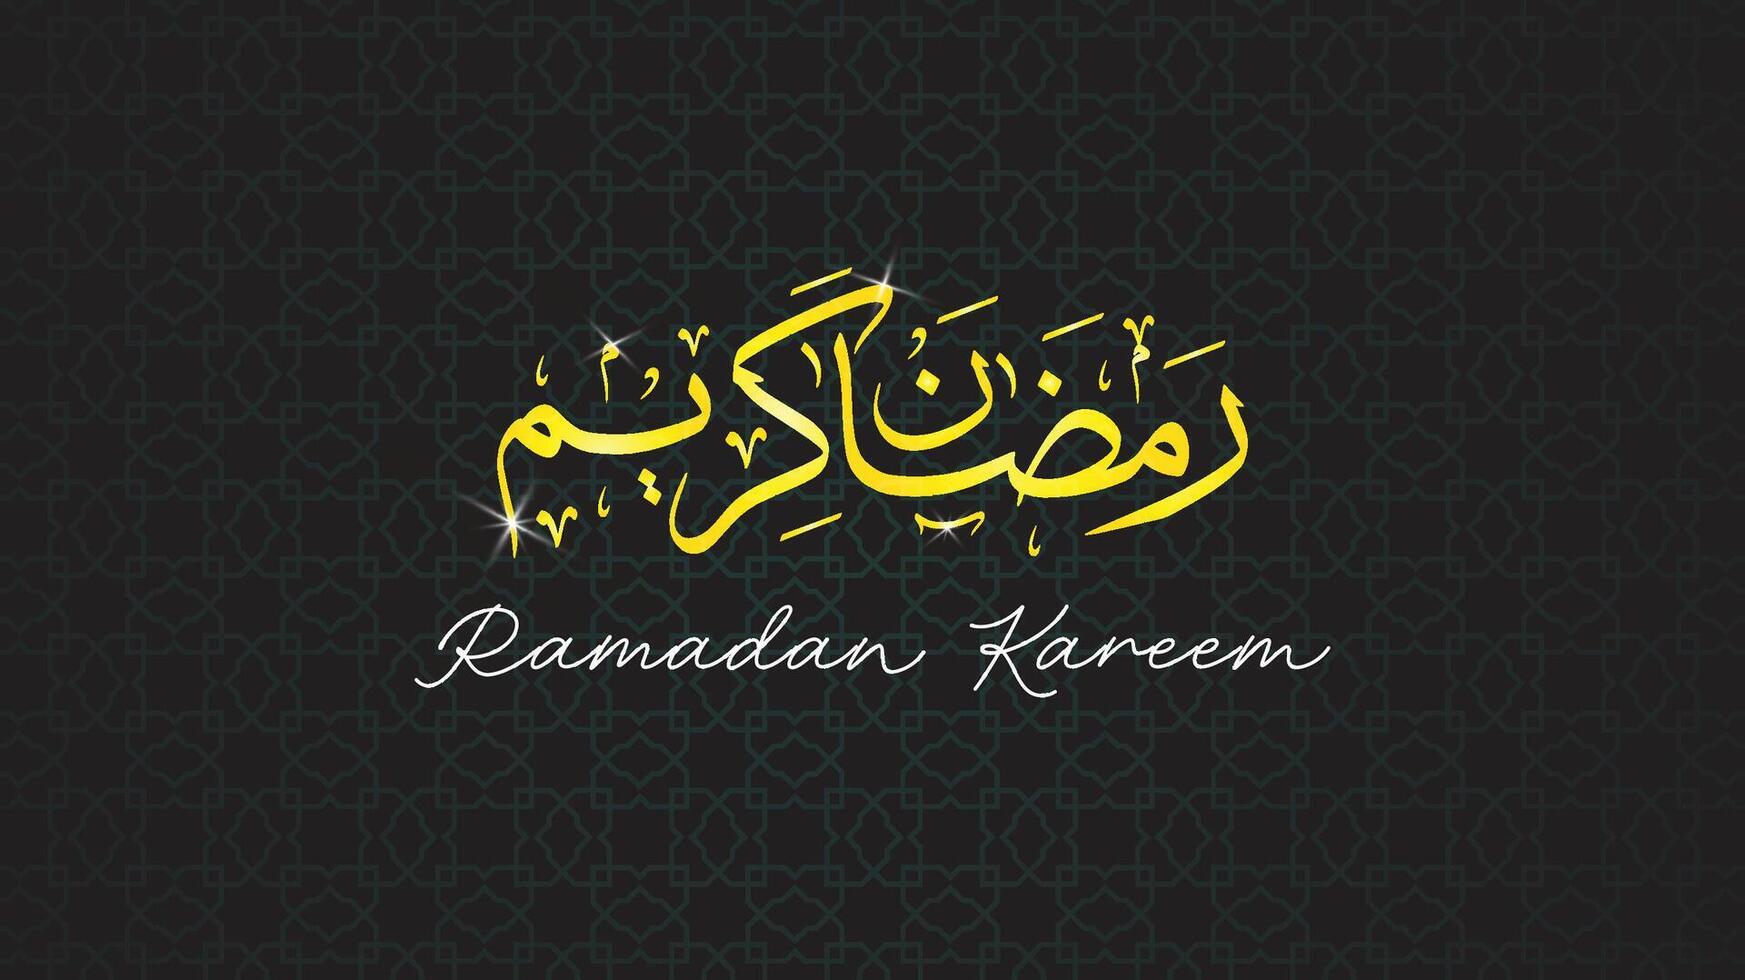 Ramadan Kareem arabic calligraphy greeting design, islamic style mosque dome with stars and green background, beautiful banner, flyer or social media post vector